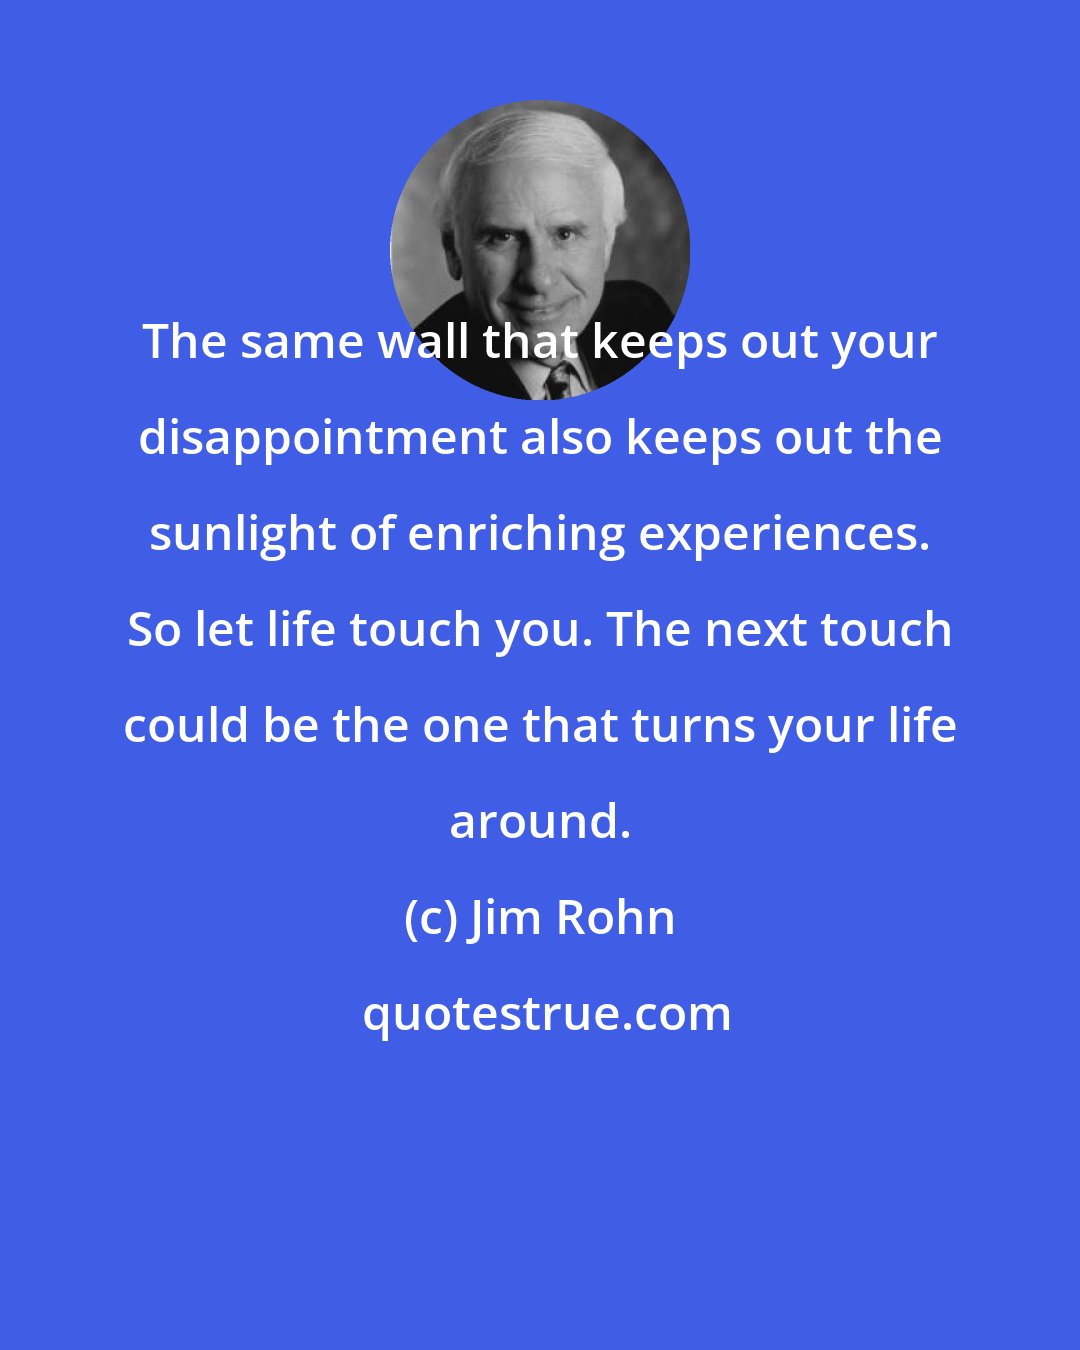 Jim Rohn: The same wall that keeps out your disappointment also keeps out the sunlight of enriching experiences. So let life touch you. The next touch could be the one that turns your life around.